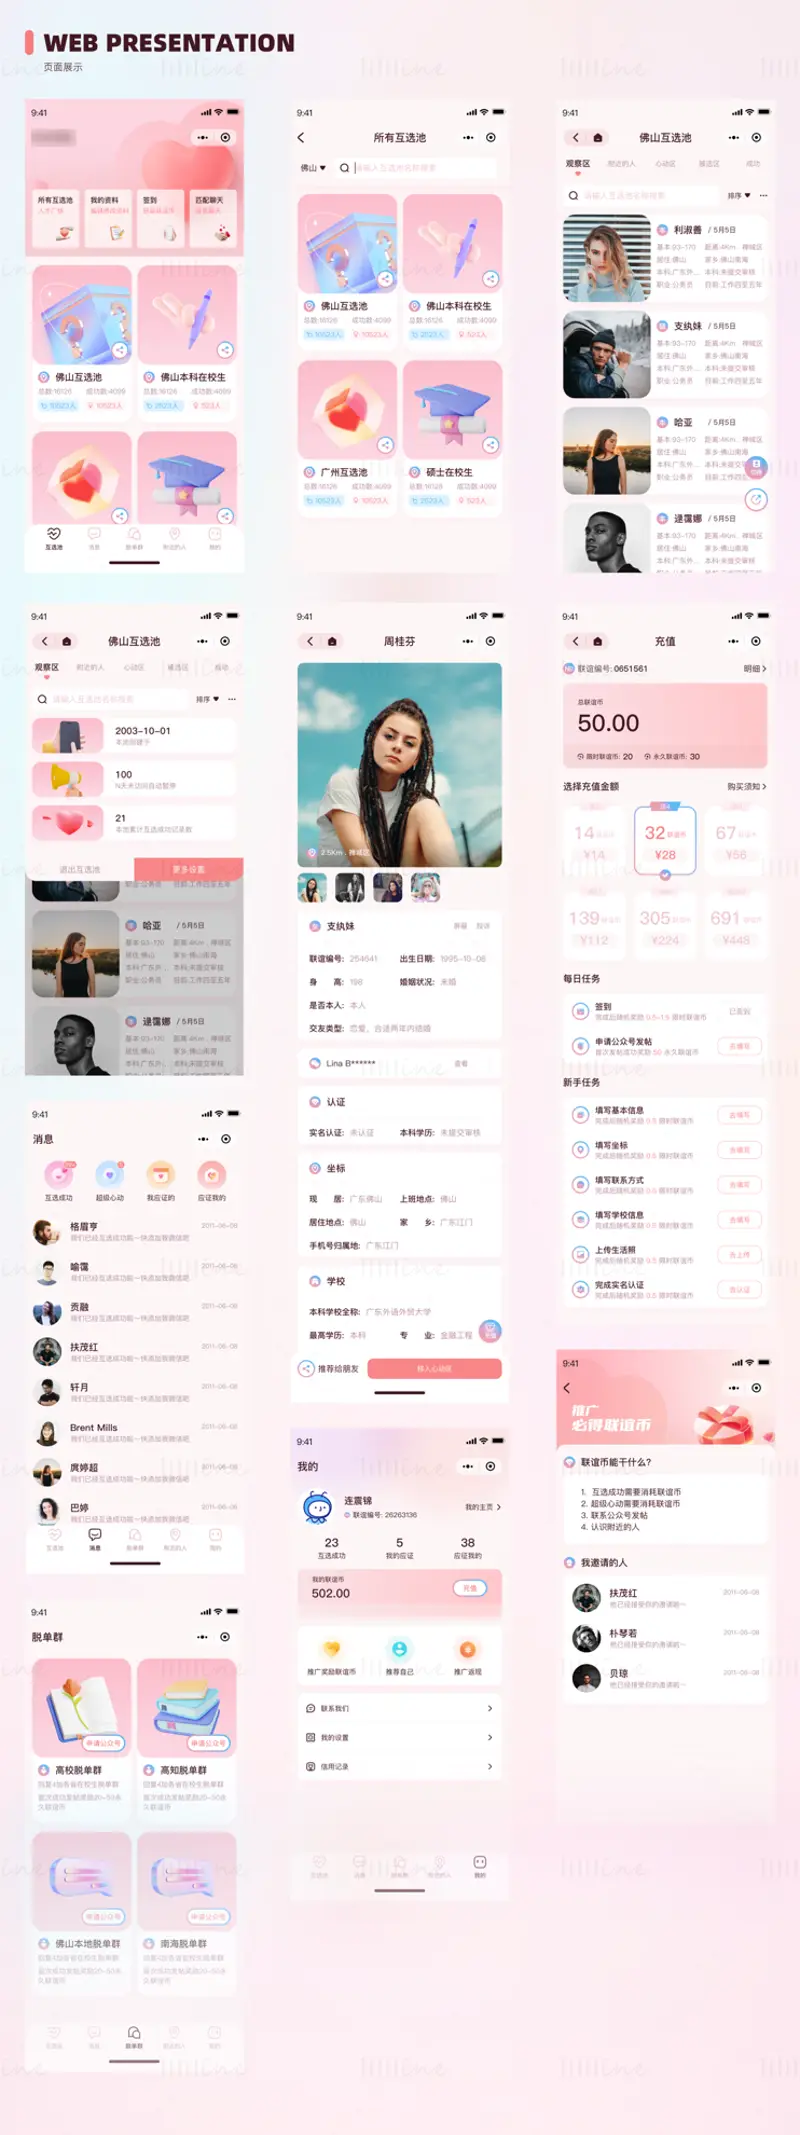 Dating and dating applet interface design sketch template